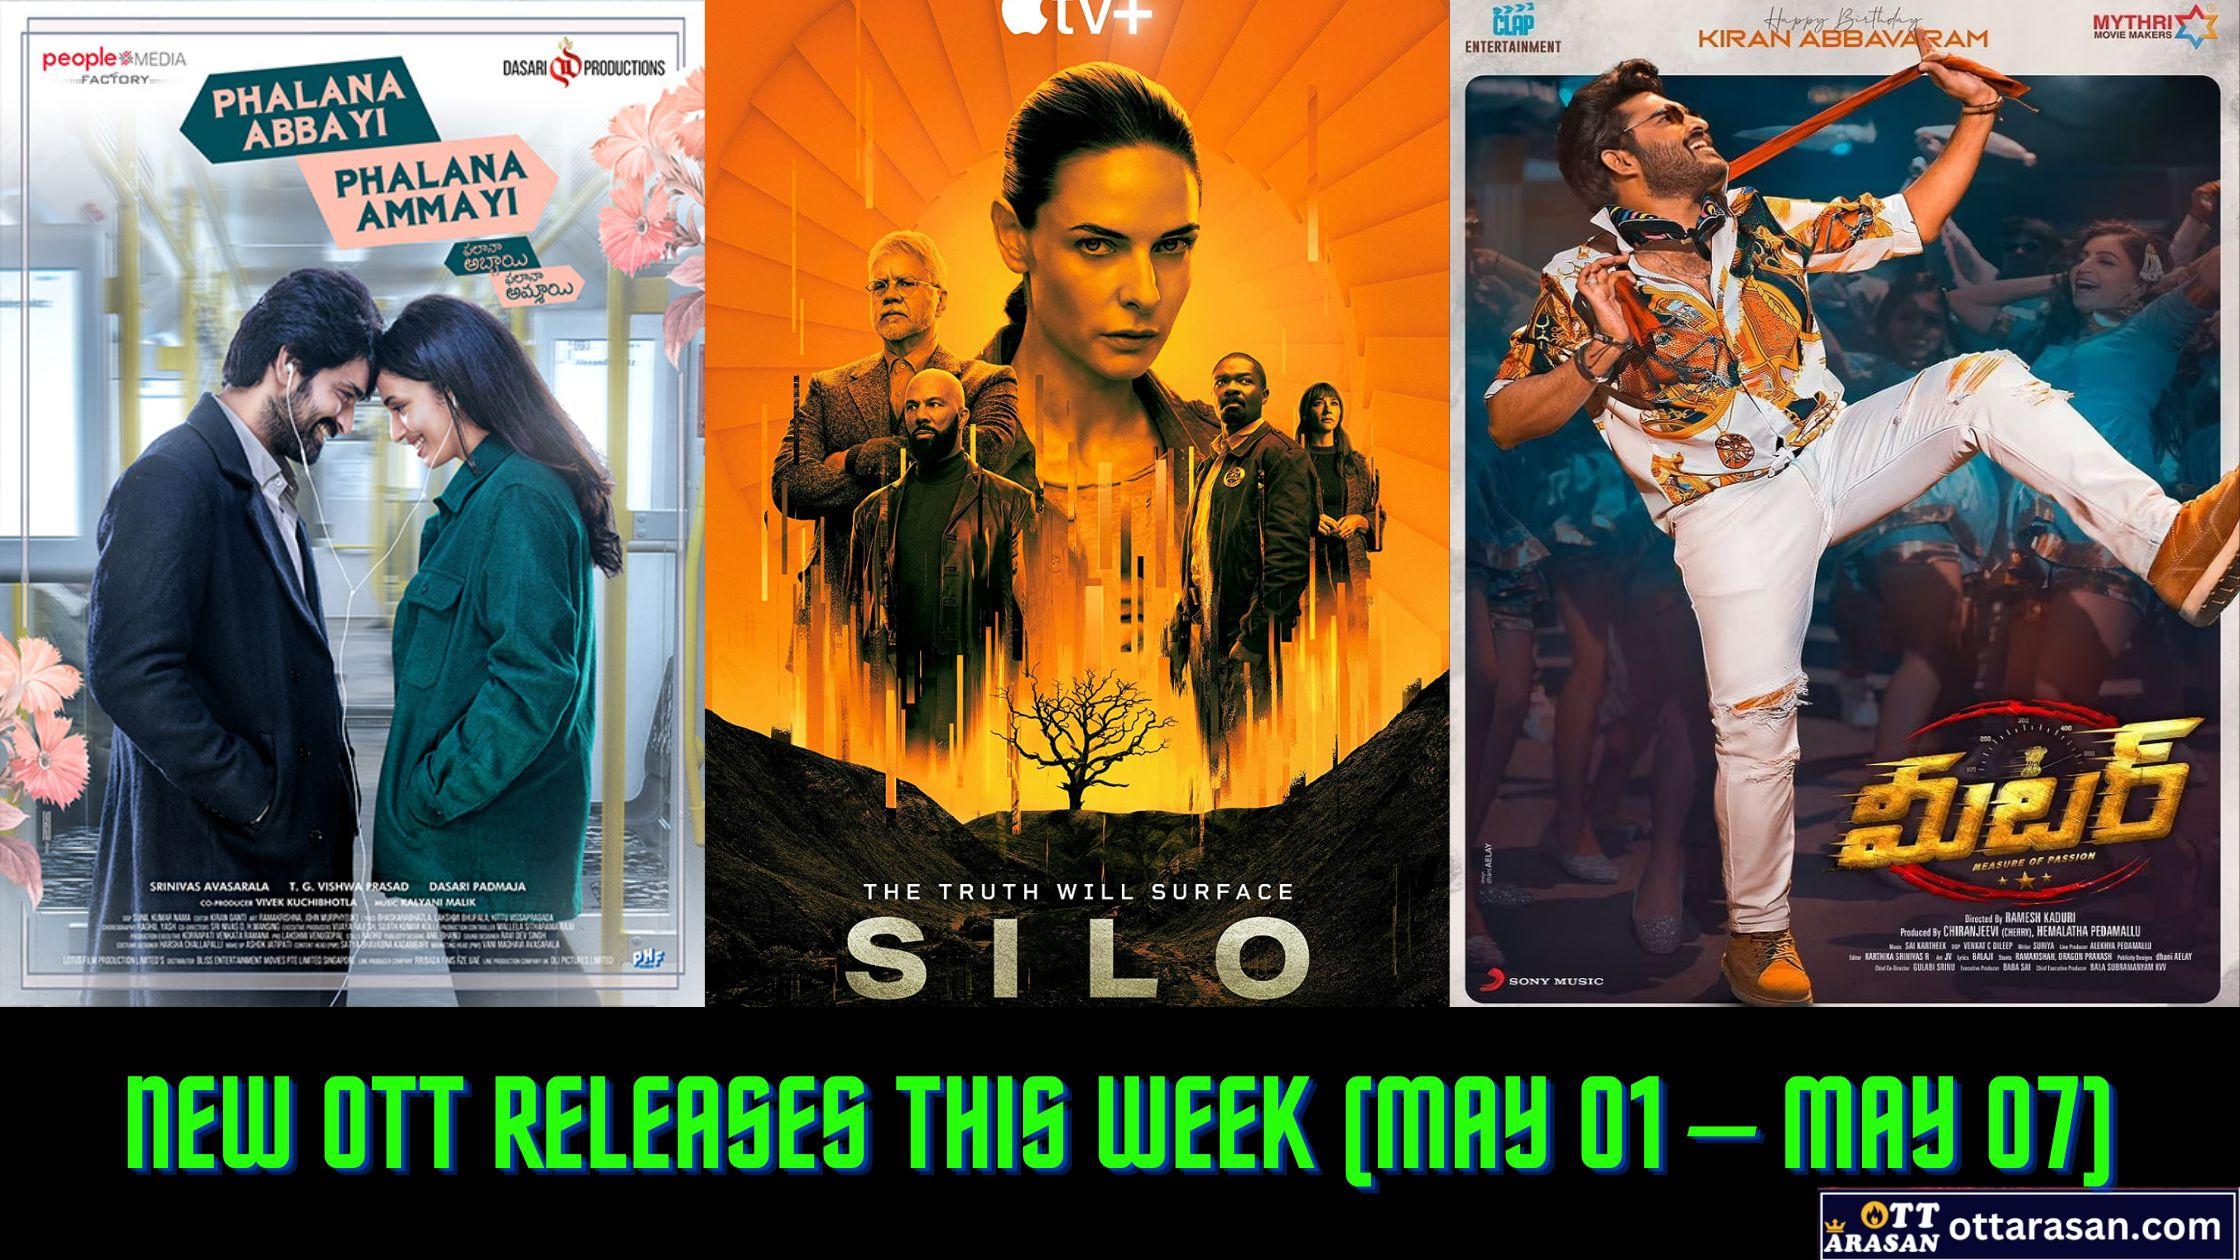 New OTT Releases This Week (May 01 – May 07)